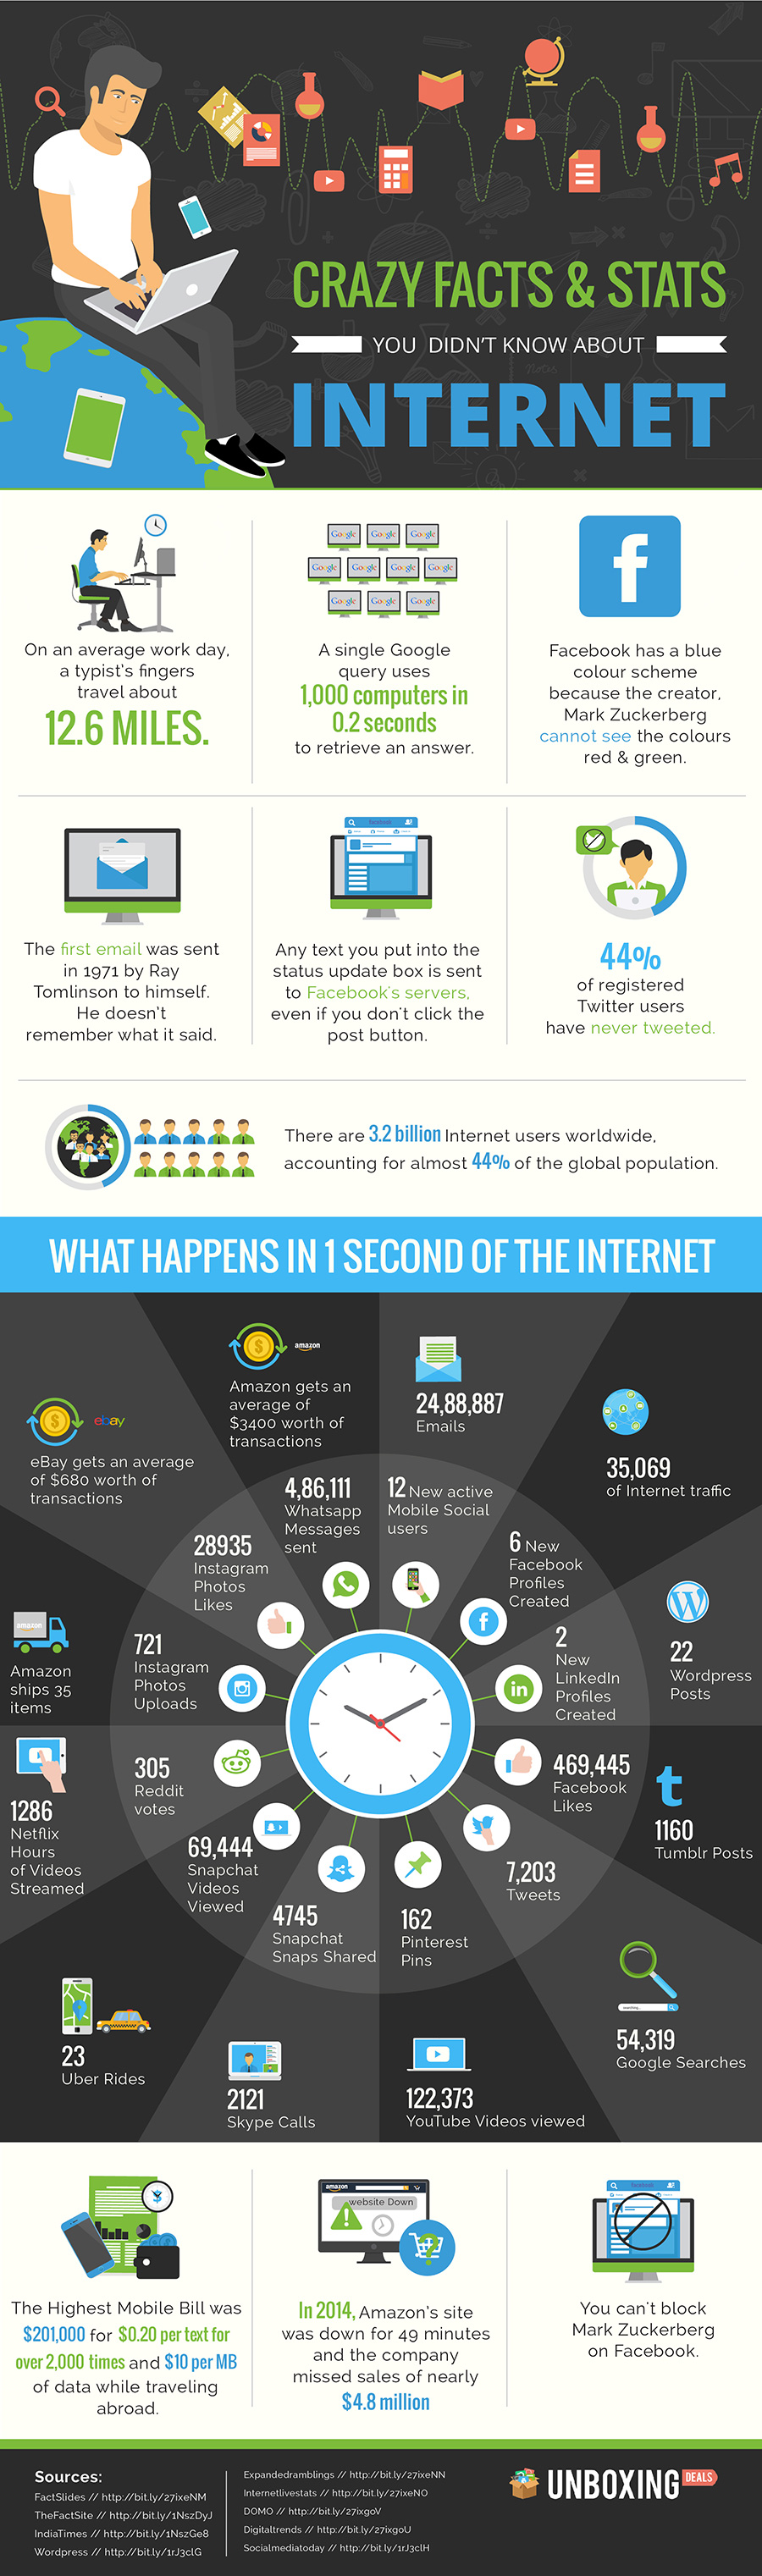 What happens in one second on the internet! [Infographic]